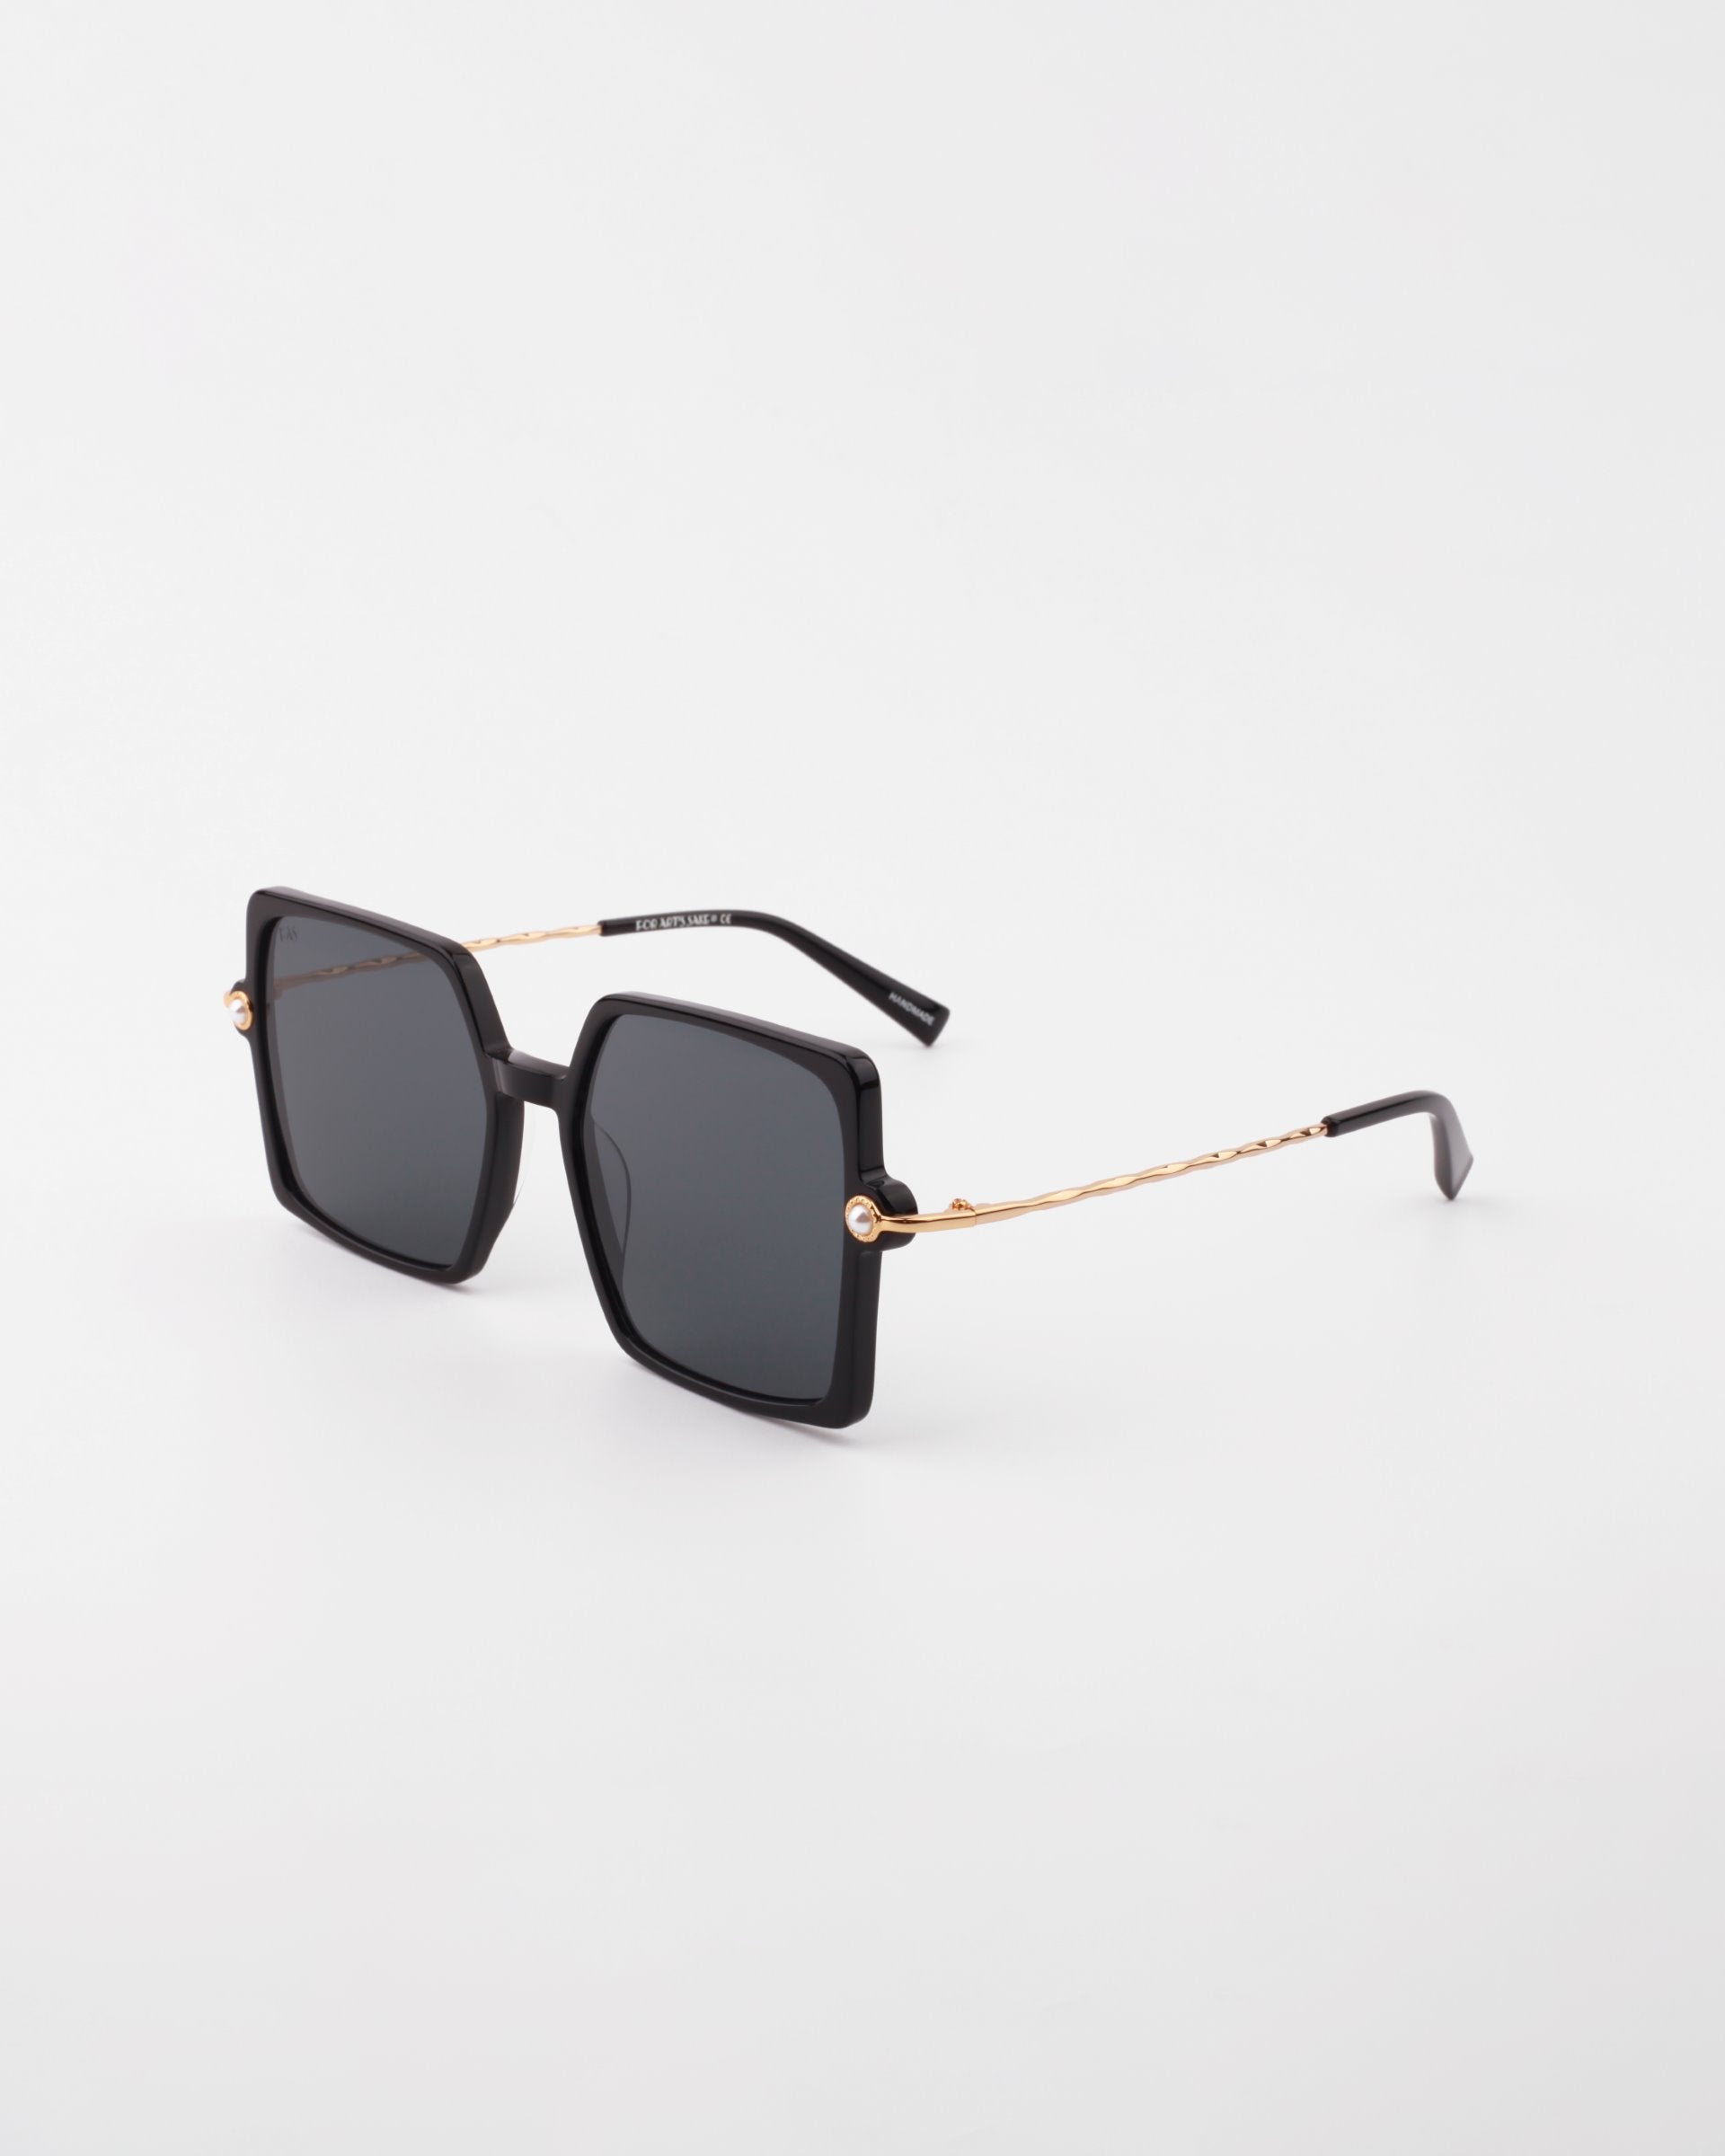 A pair of Moxie by For Art&#39;s Sake® black square-shaped handmade acetate sunglasses featuring 18-karat gold-plated arms. The twisted design of the arms leads to black ear tips. Dark lenses provide full UVA &amp; UVB protection, and the sunglasses are photographed against a white background.